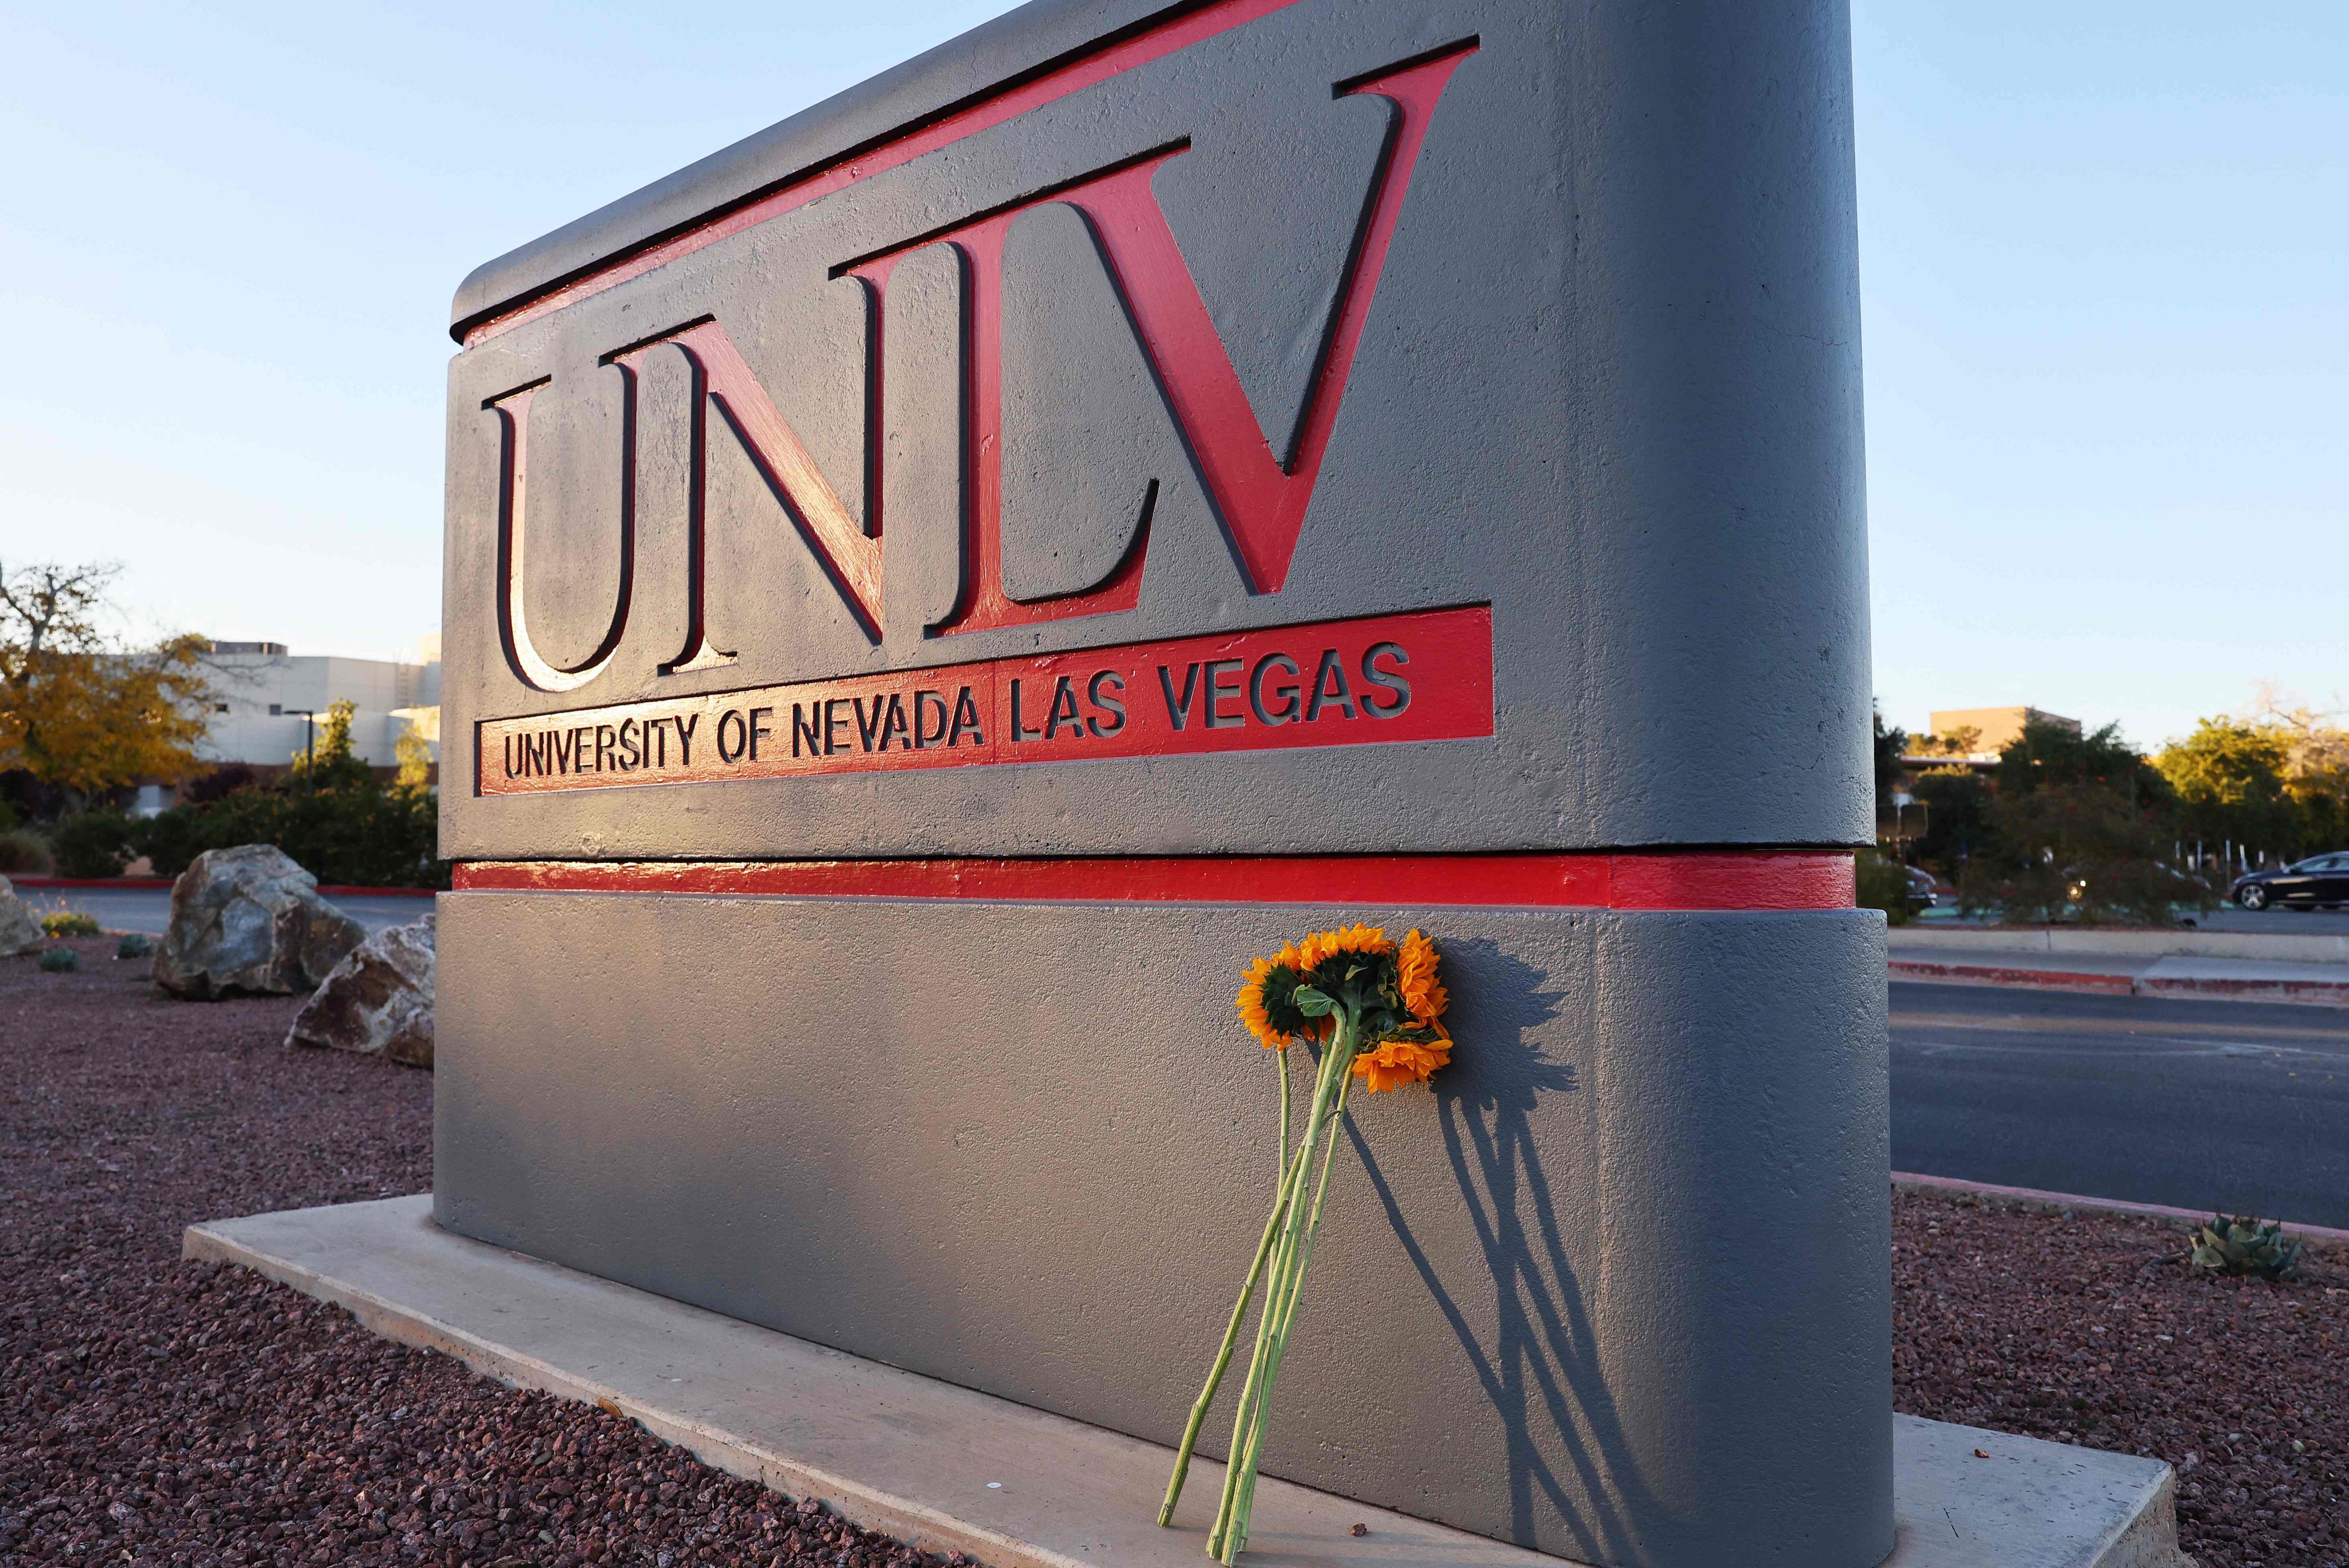 Flowers against a UNLV campus sign after a December 6 shooting left three dead. Photo: AFP